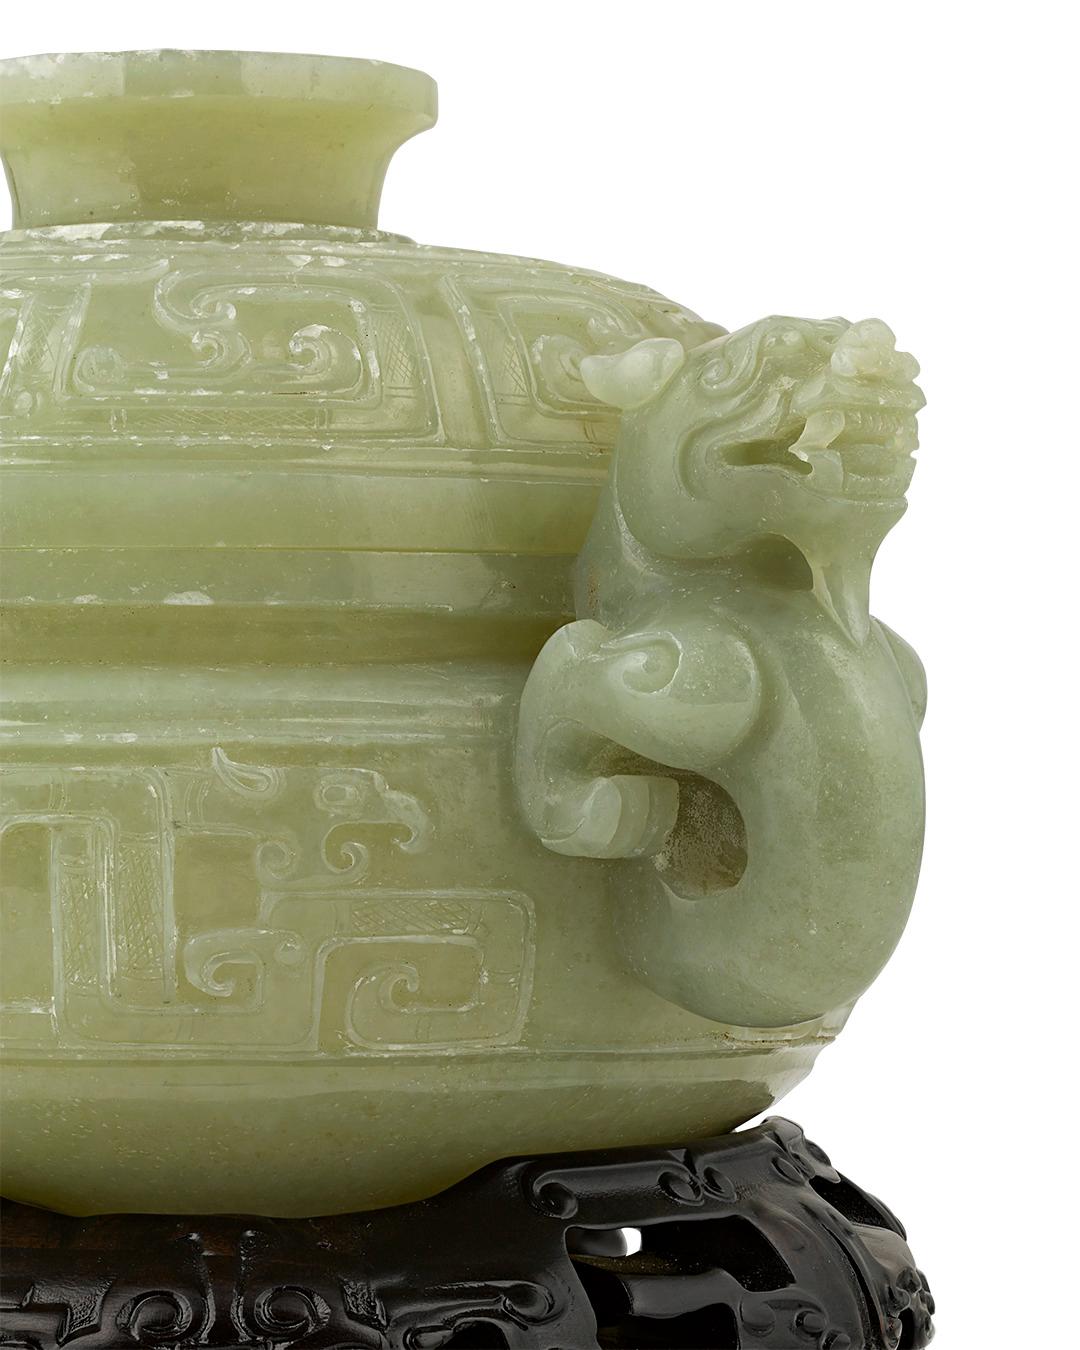 A pair of dragons serve as the handles of this exceptional Chinese covered bowl. The intricate piece is crafted from a rare type of pale green jade known as 